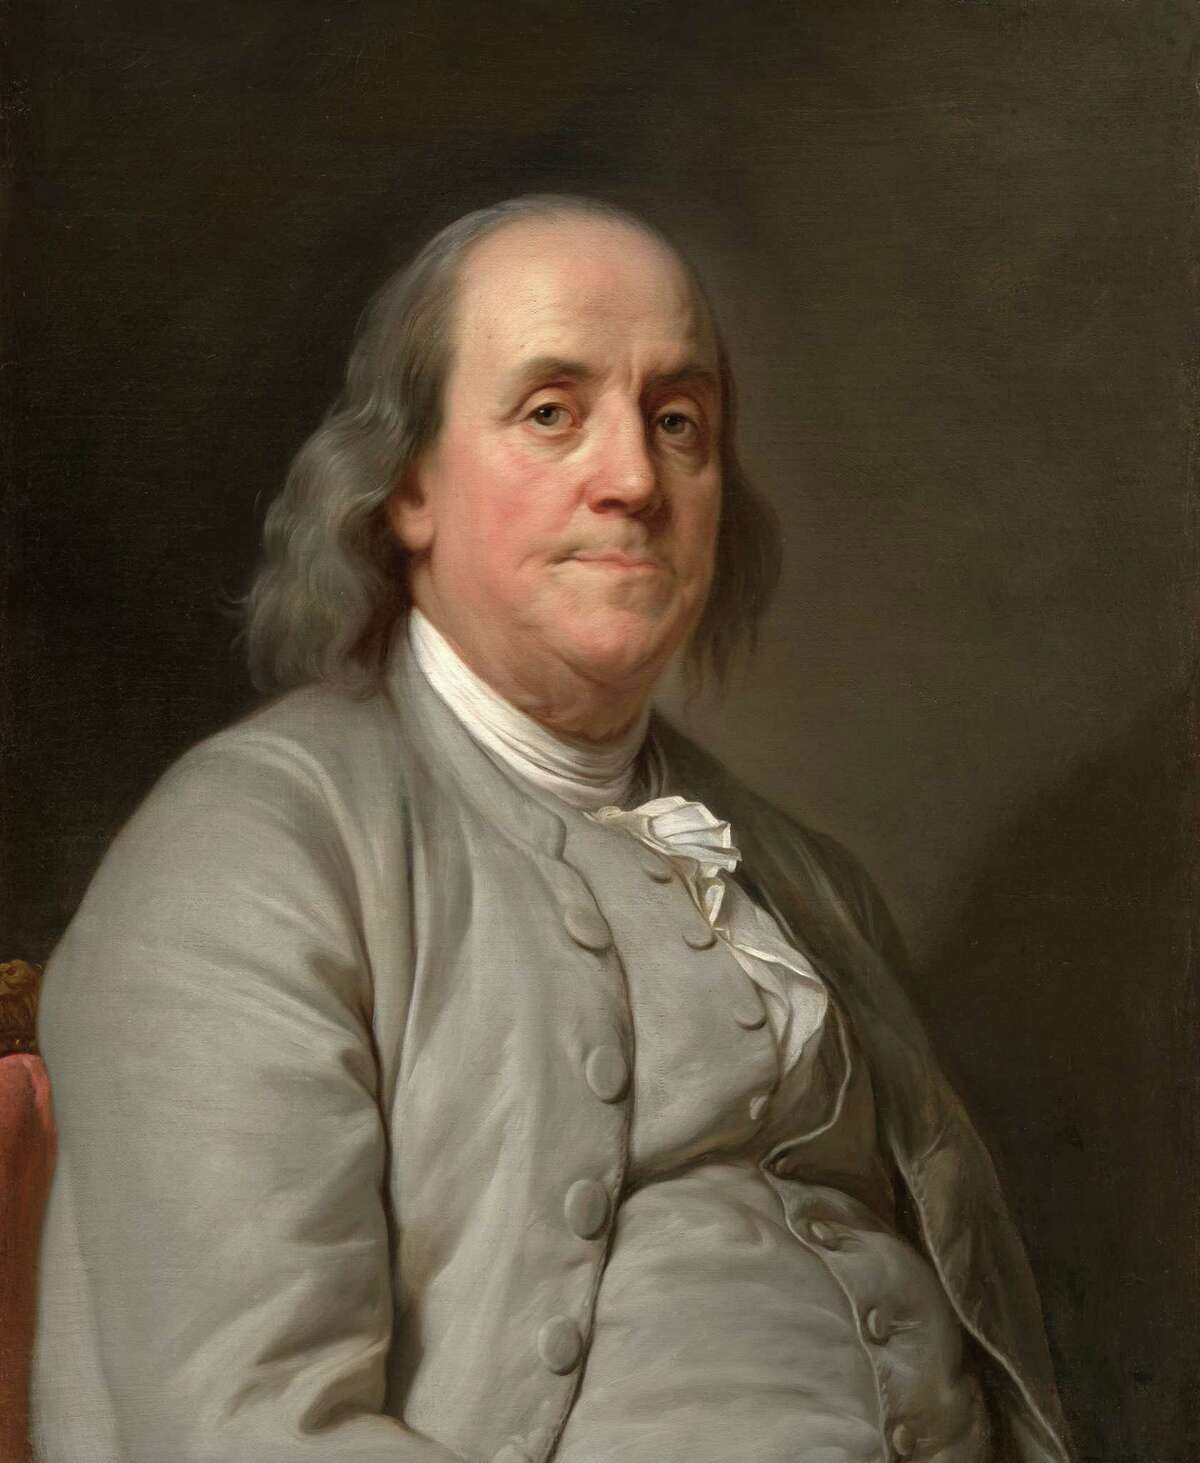 Founding Father Benjamin Franklin began his daily morning routine at 5 a.m.